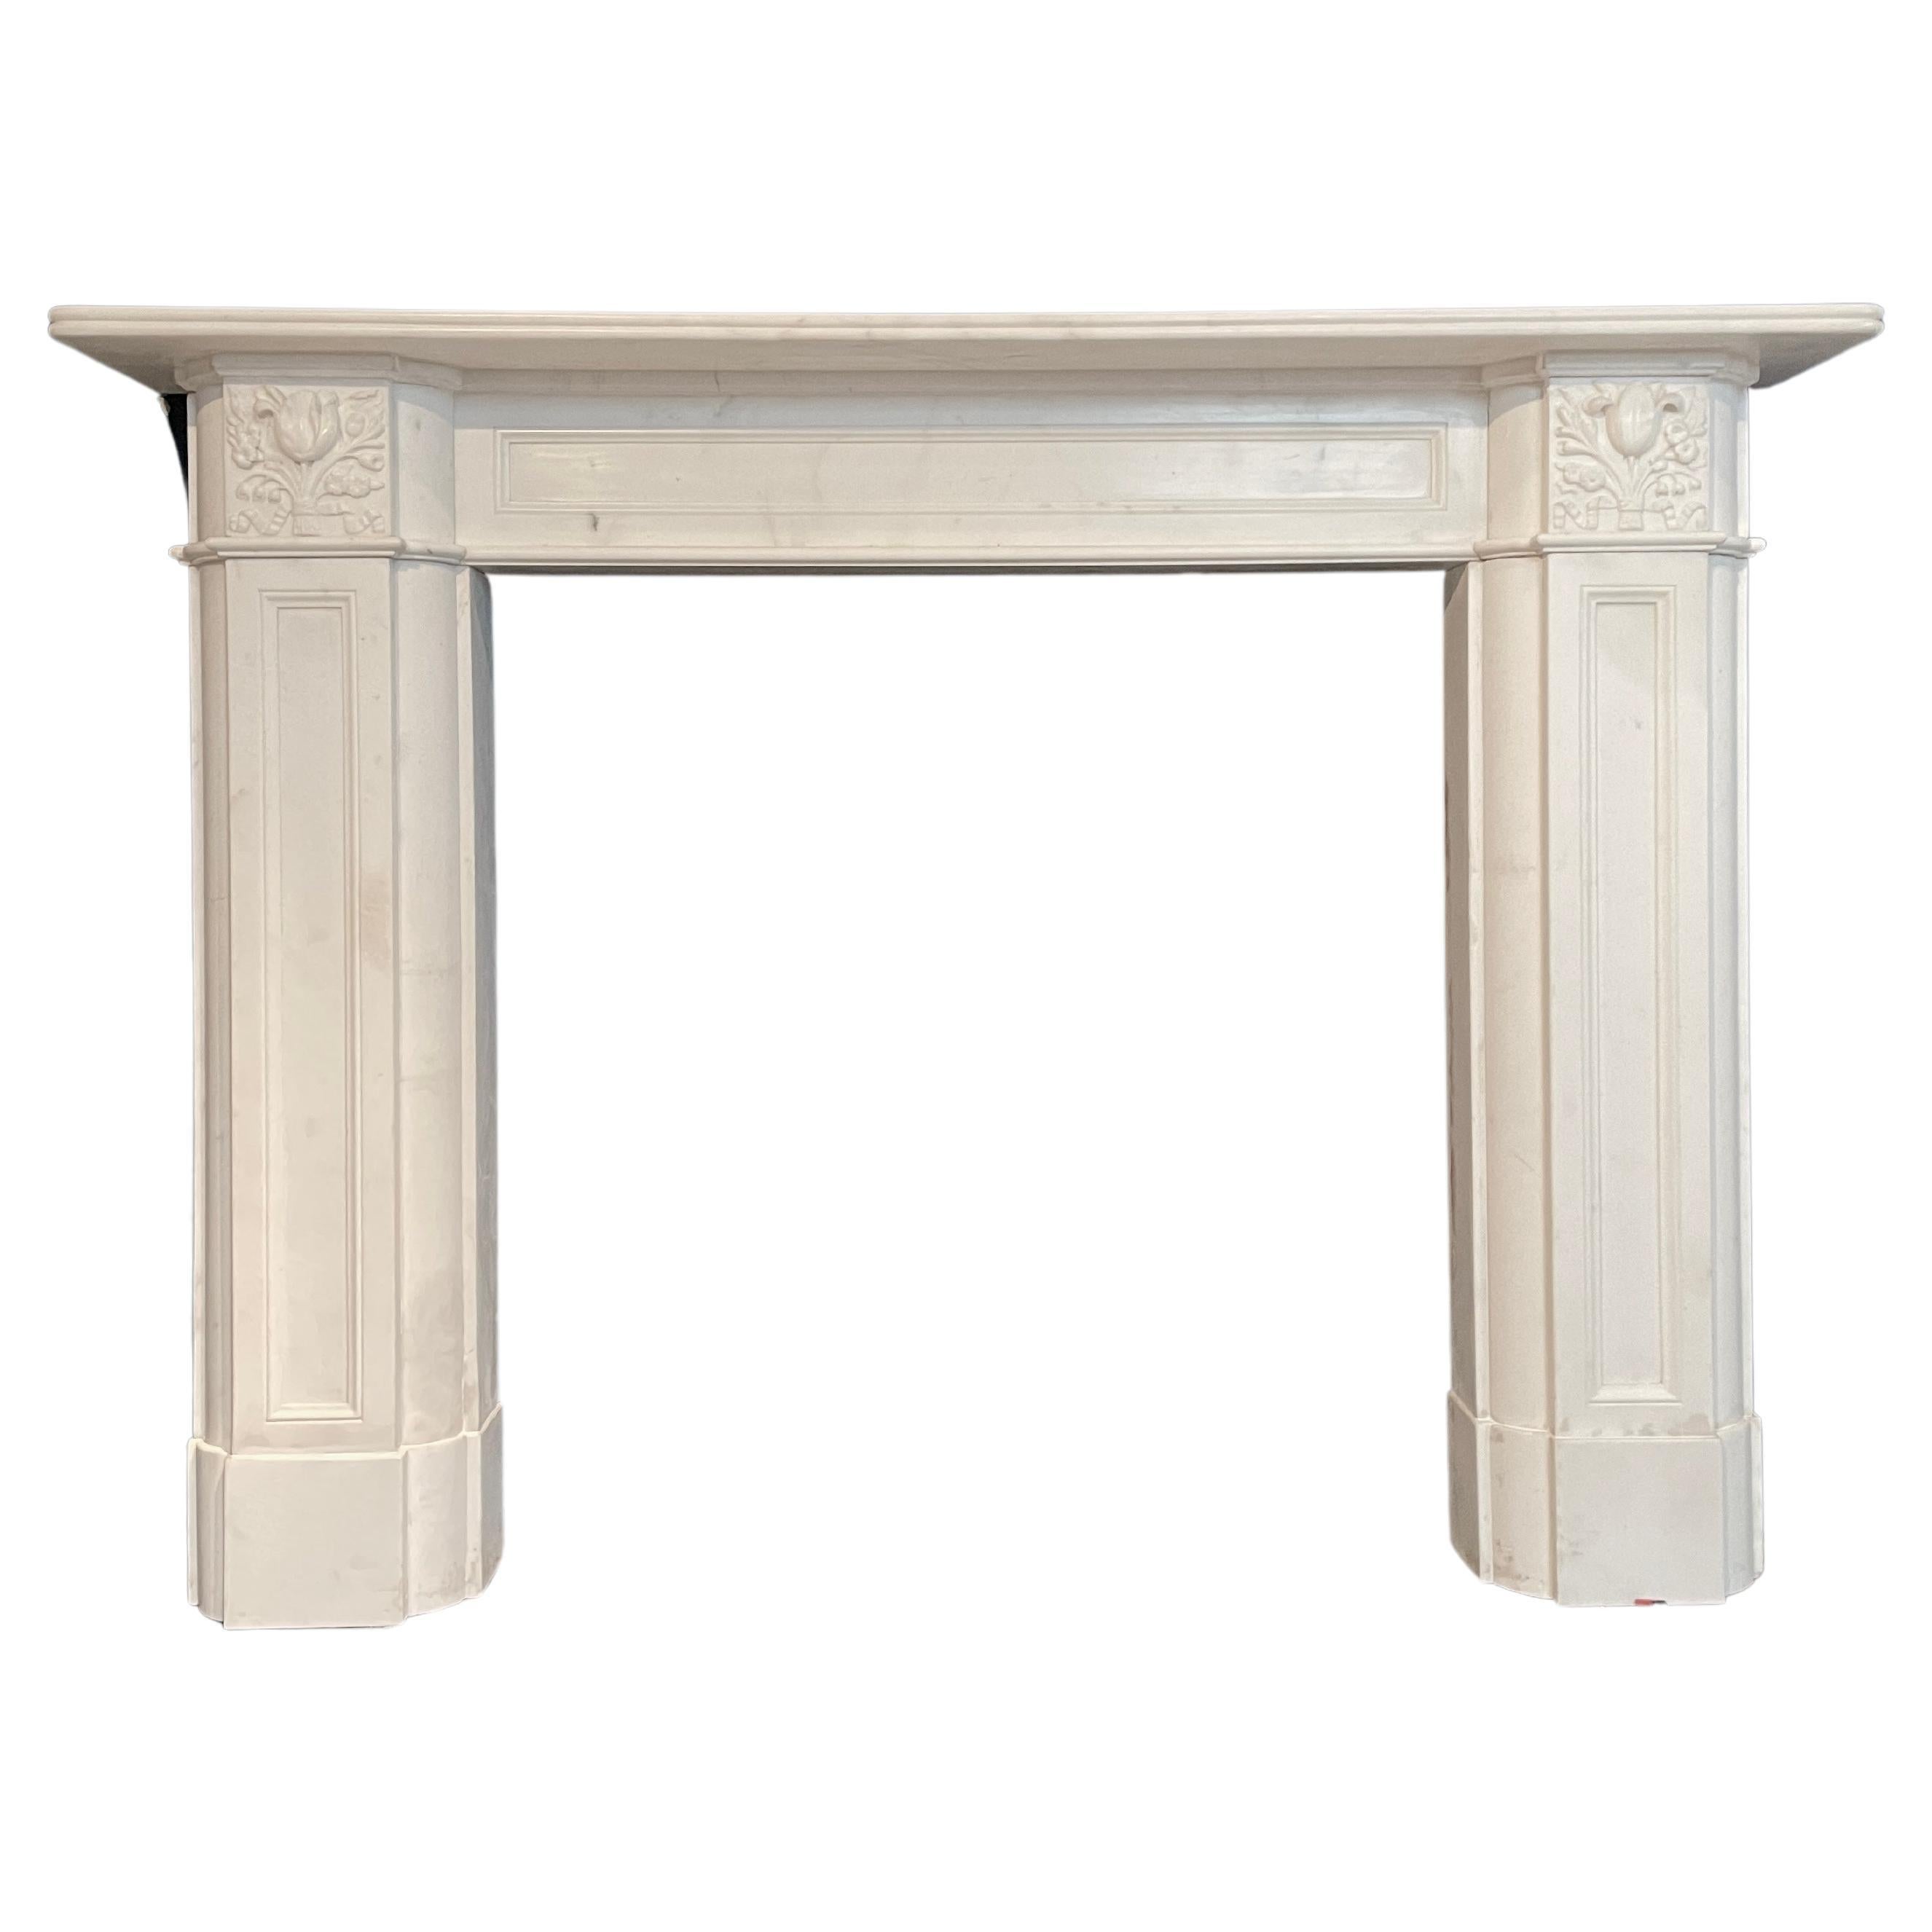 English Regency Statuary White Marble Fireplace Mantel For Sale